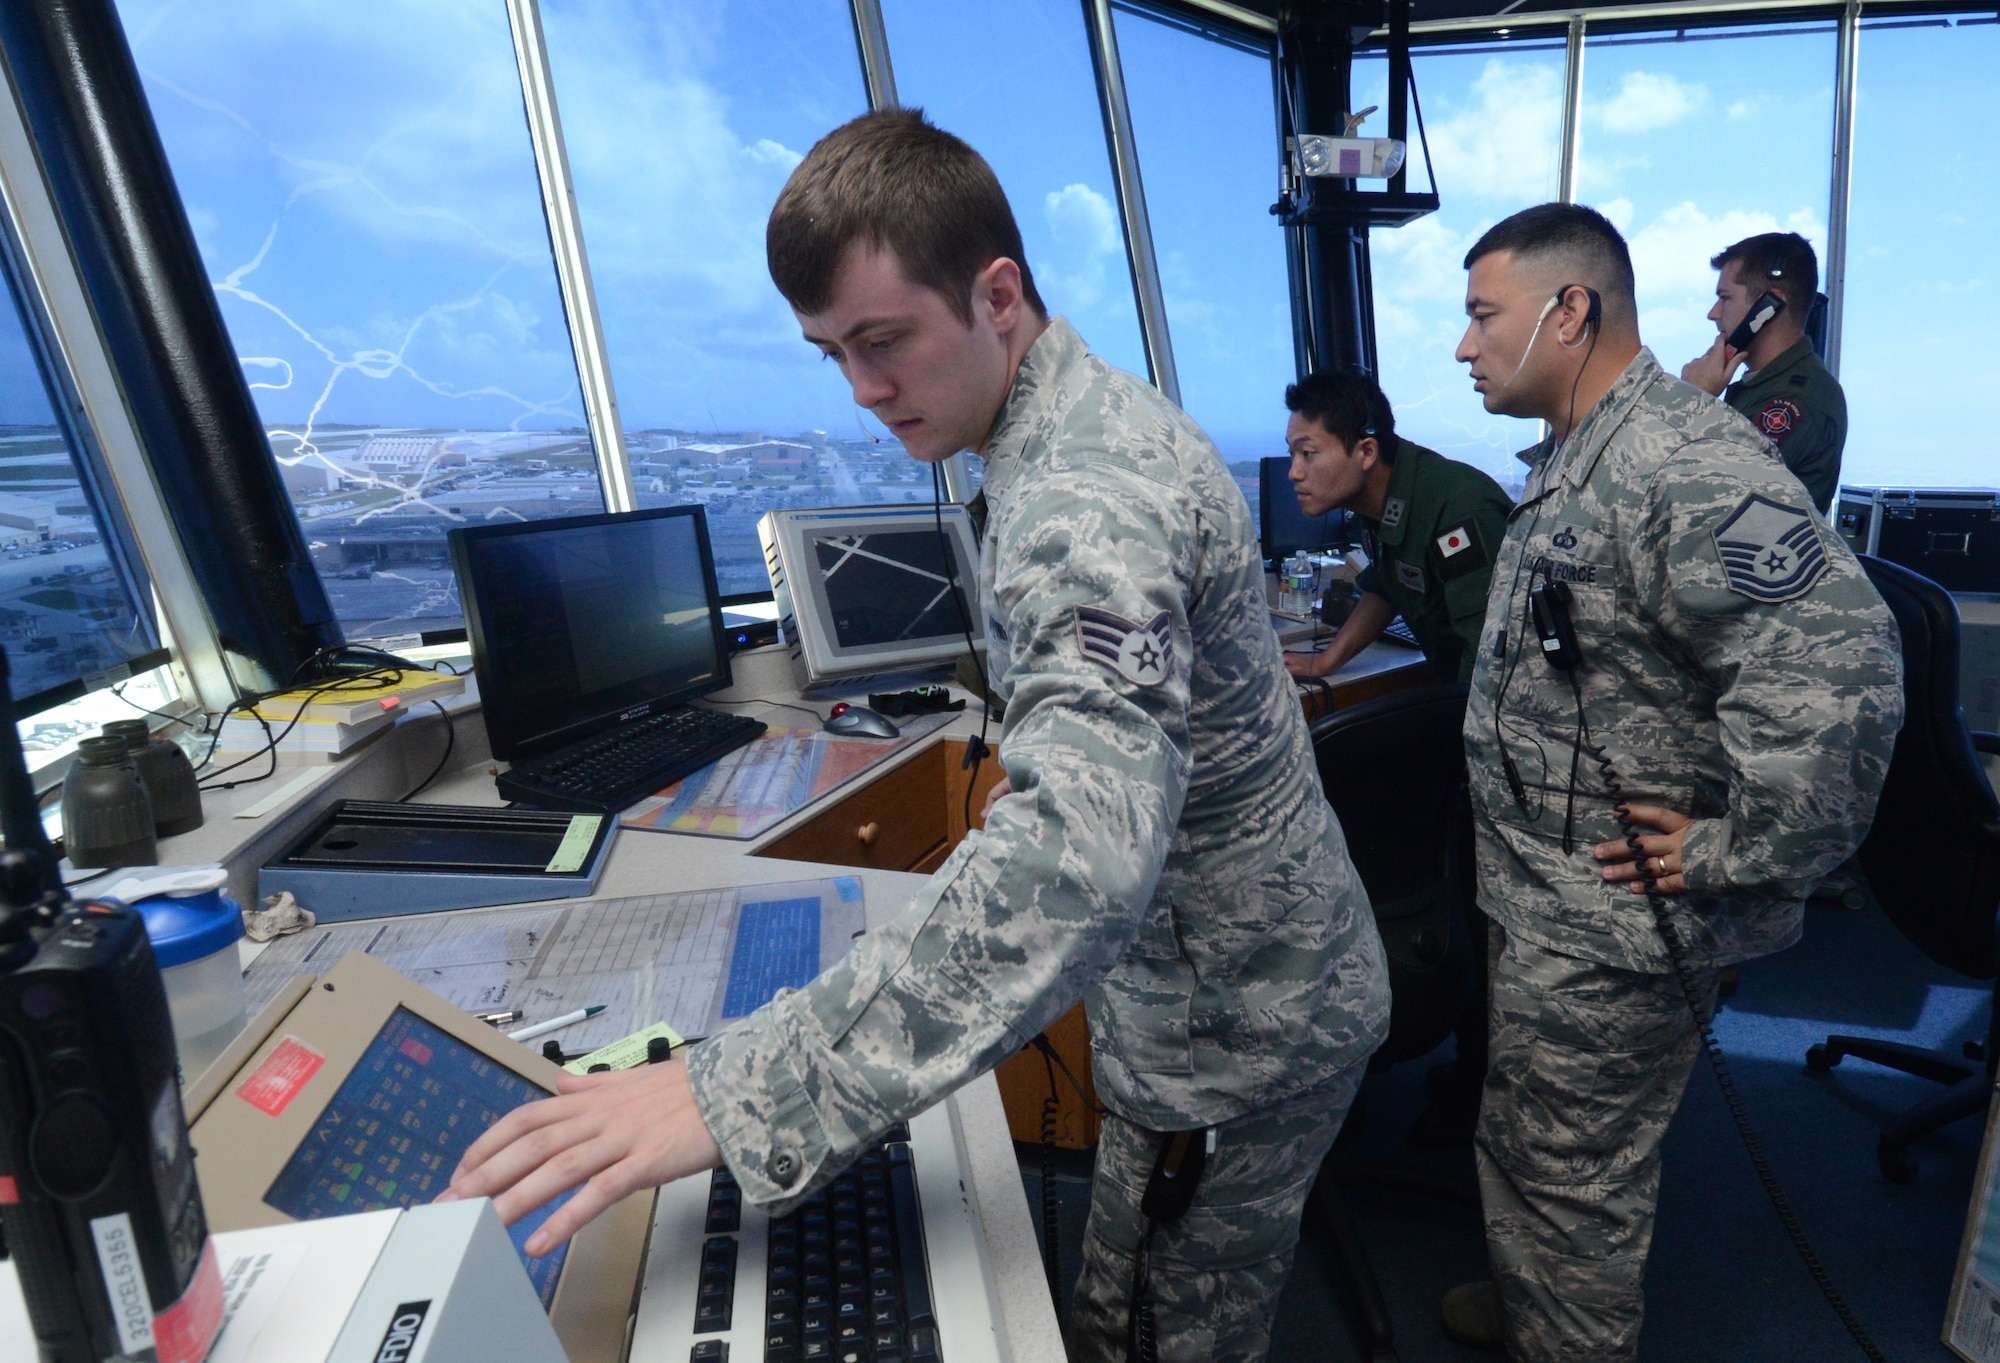 Senior Airman Michael-Paul Kendall, 36th Operations Support Squadron air traffic controller, monitors aircraft movements for Japan Air Self-Defense Force and U.S. Air Force aircraft Feb. 24, 2014, during Exercise Cope North 2014 on Andersen Air Force Base, Guam. The exercise, which is a joint effort between the U.S. Air Force, the Japan Air Self-Defense Force and the Royal Australian Air Force, is designed for allies to work together on both humanitarian assistance and disaster relief (HA/DR) missions as well as large force employment mission with dissimilar aircraft. (U.S. Air Force photo by Airman 1st Class Emily A. Bradley/Released)